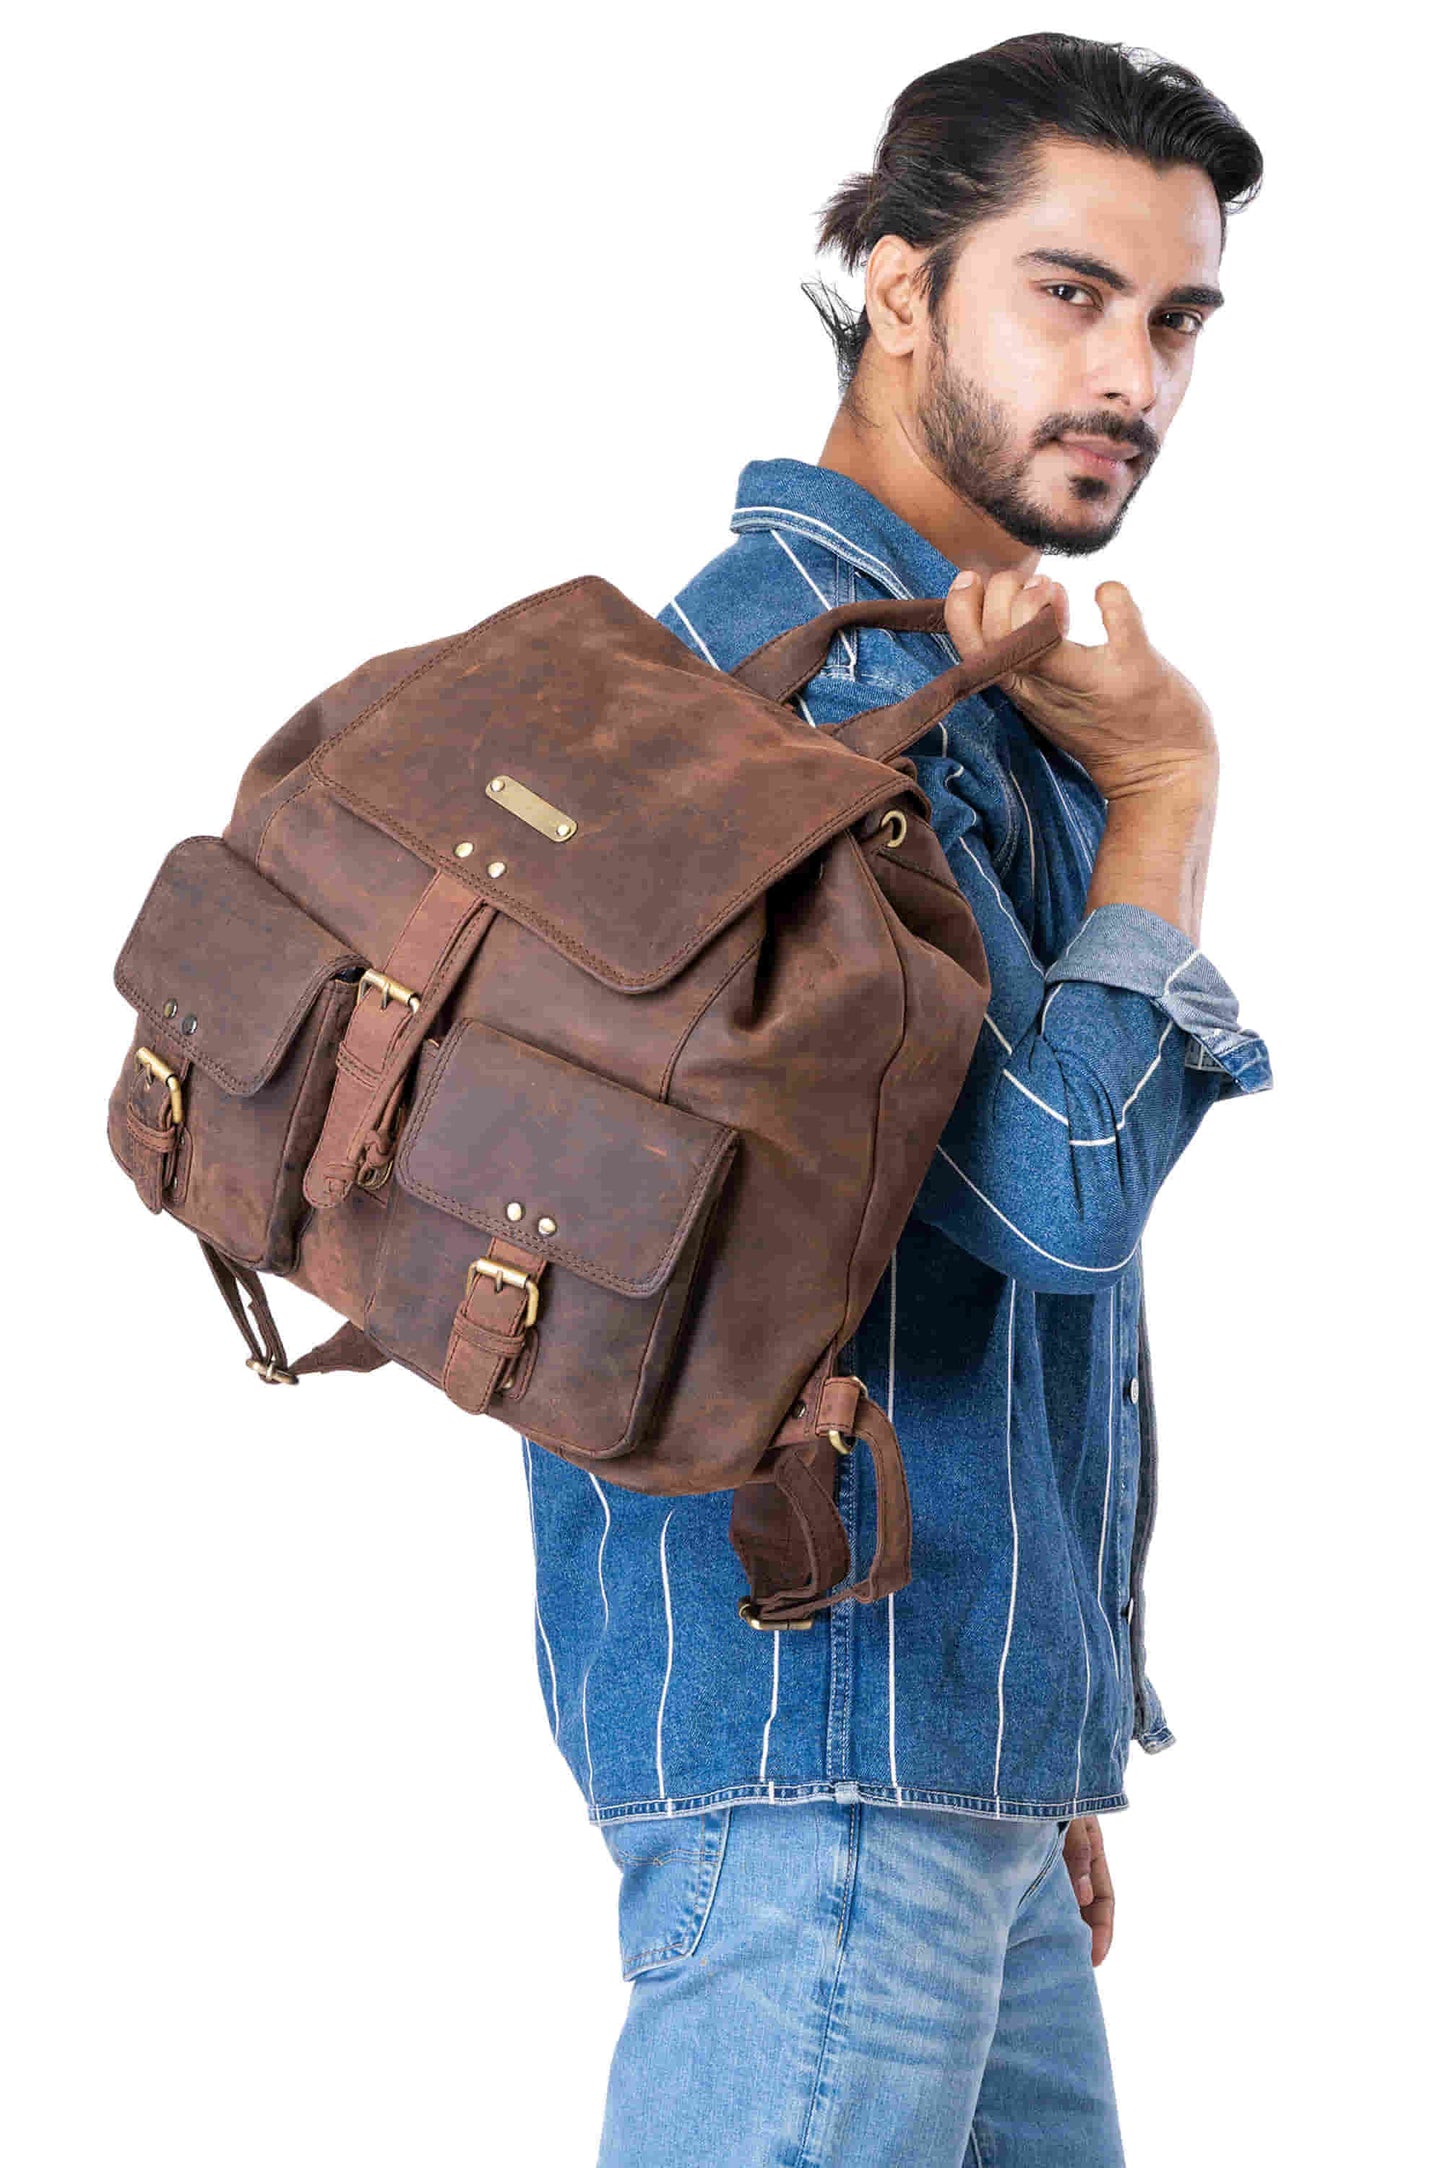 Style n Craft 392650 Backpack in Full Grain Dark Brown Hunter Leather - in use - slinging the backpack over the shoulder by the top leather strap